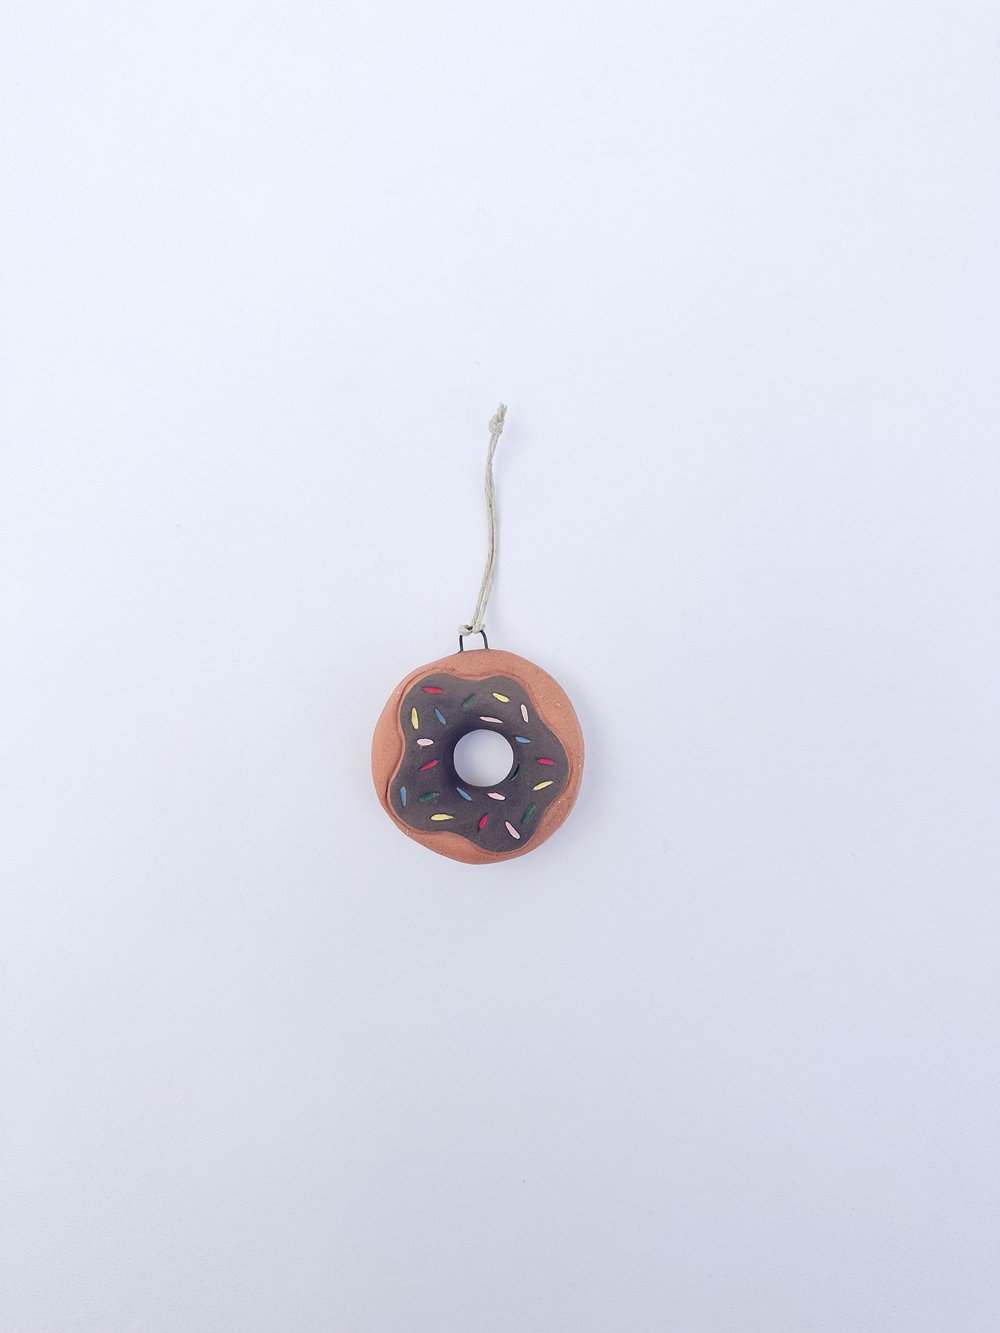 Image of Chocolate Donut Ornament